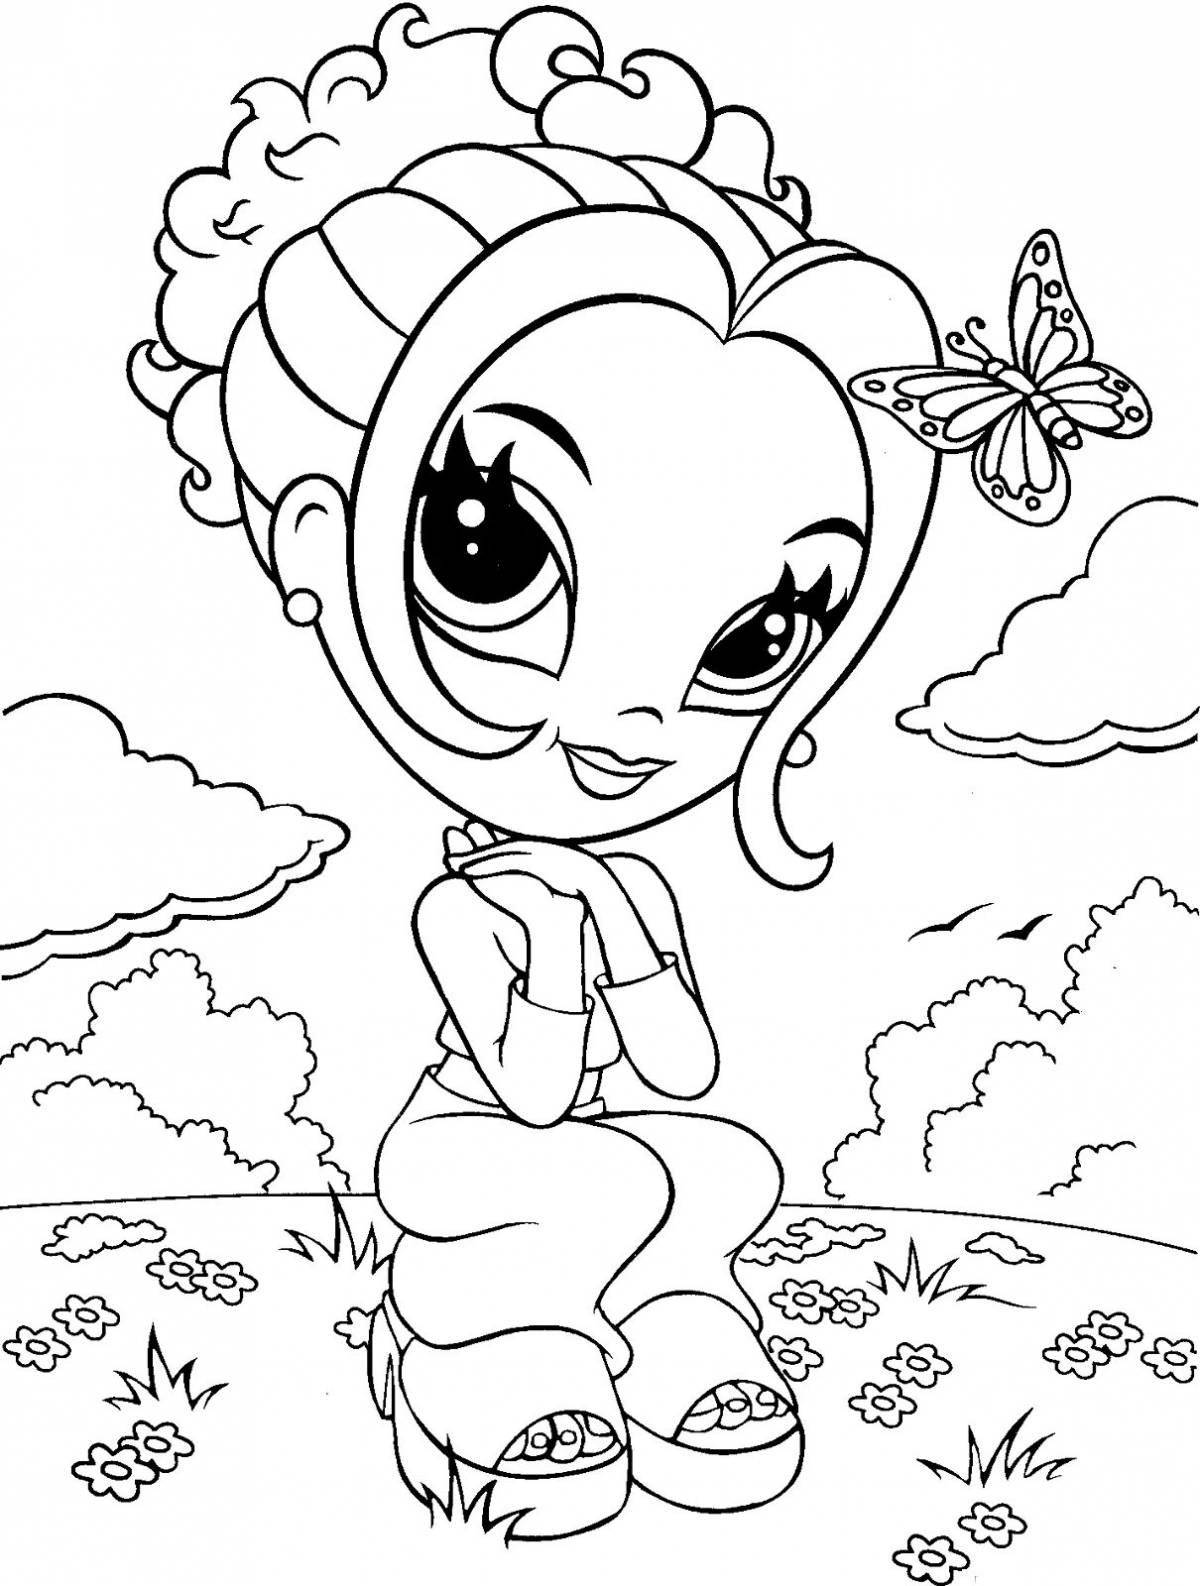 Fun coloring book for 10-15 year olds